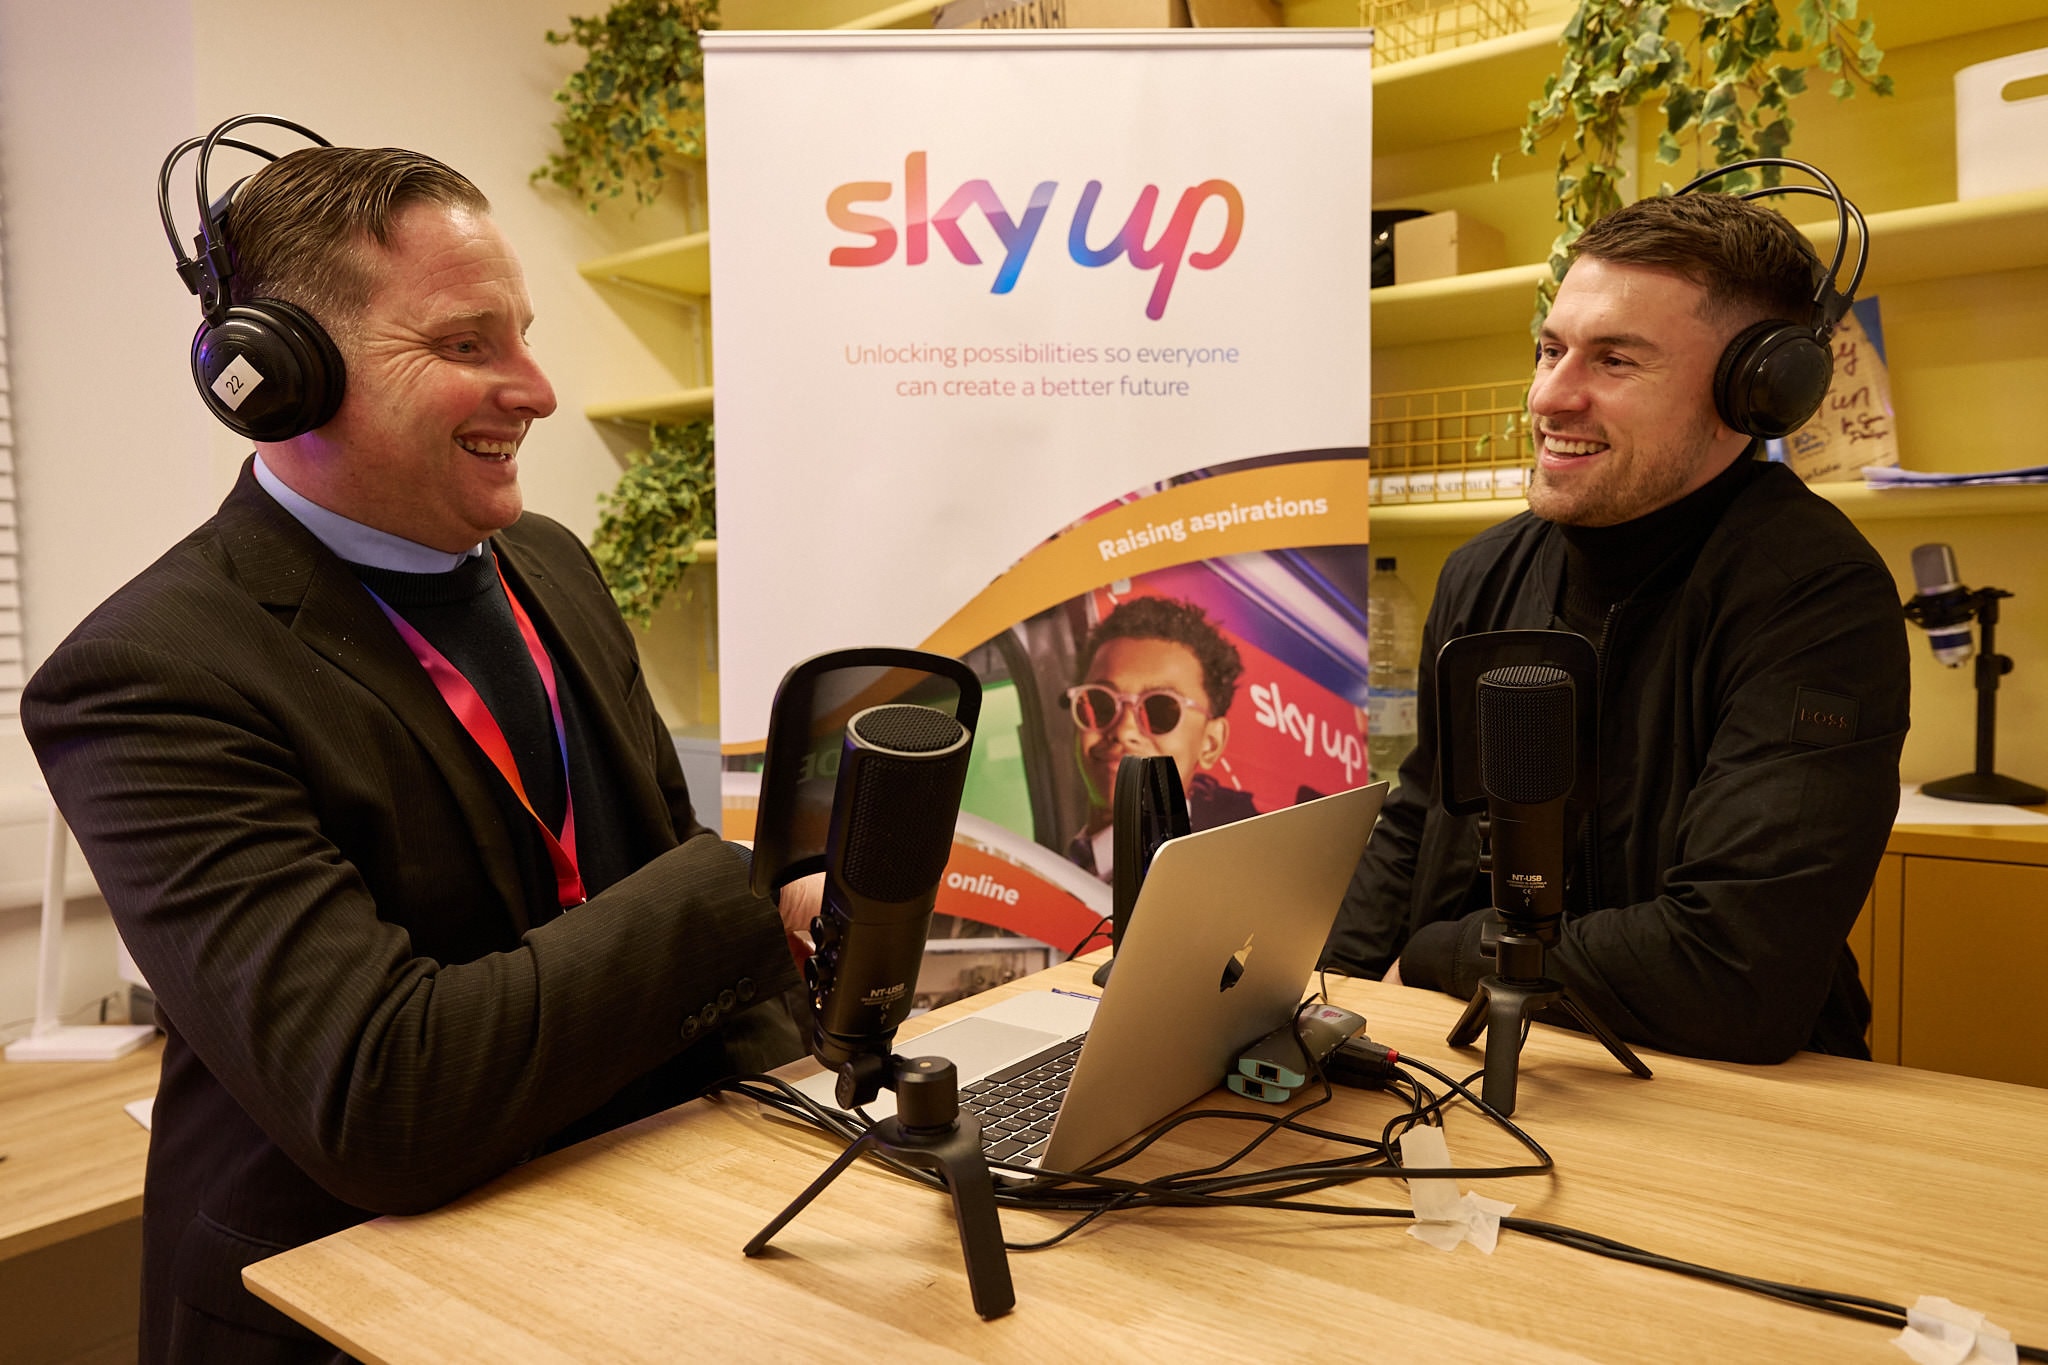 Sky partners with Cardiff Council’s Youth Services to open first Sky Up Digital Hub in Wales